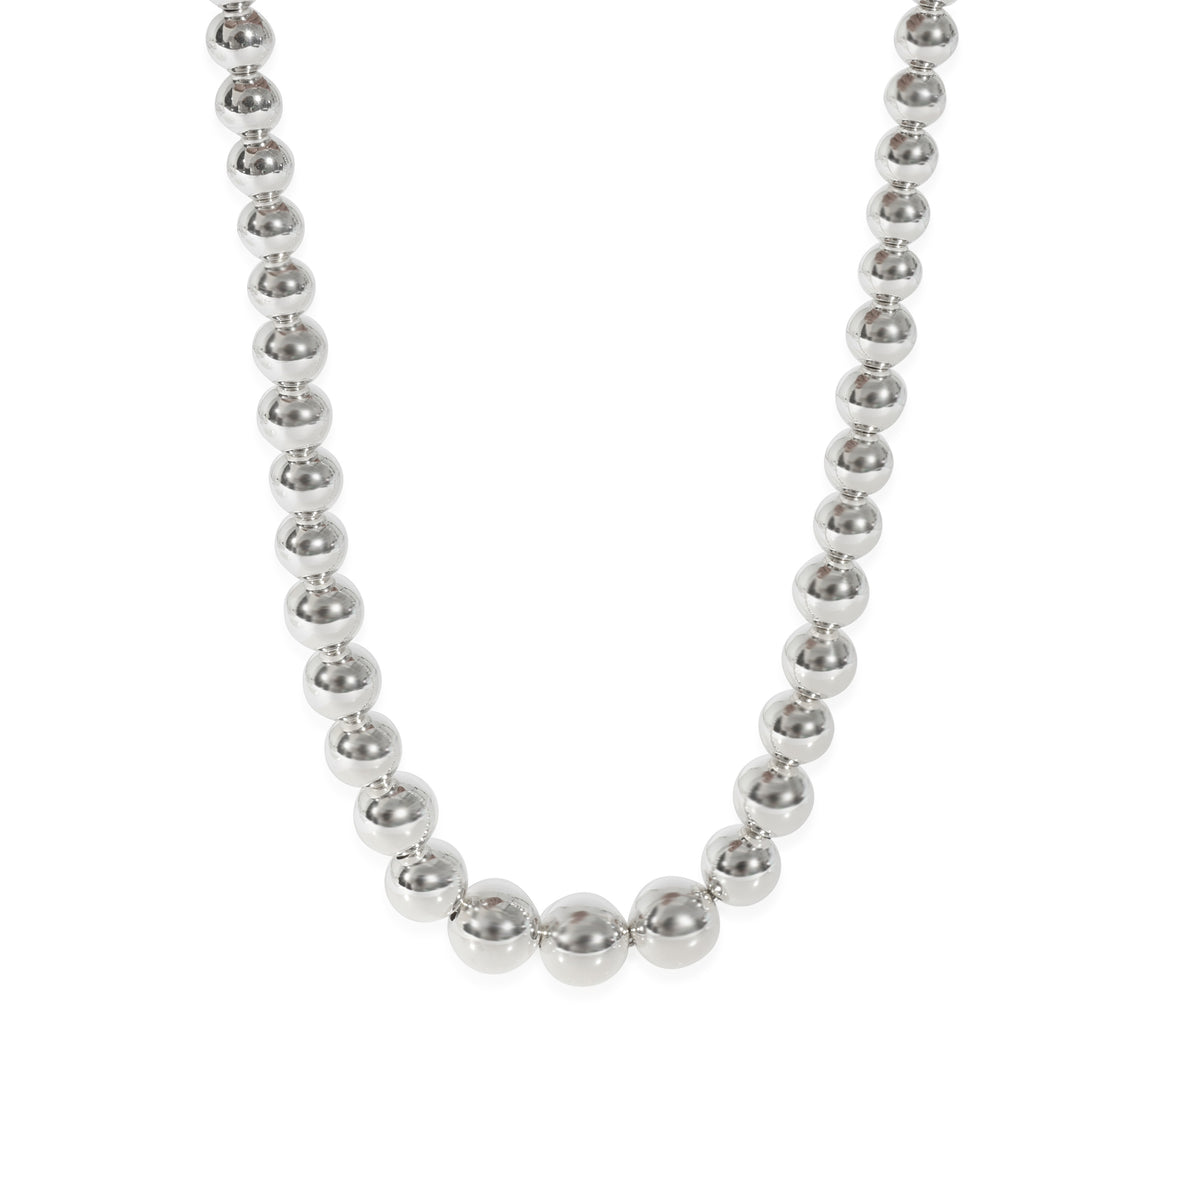 Tiffany & Co. HardWear Graduated Ball  Necklace in  Sterling Silver